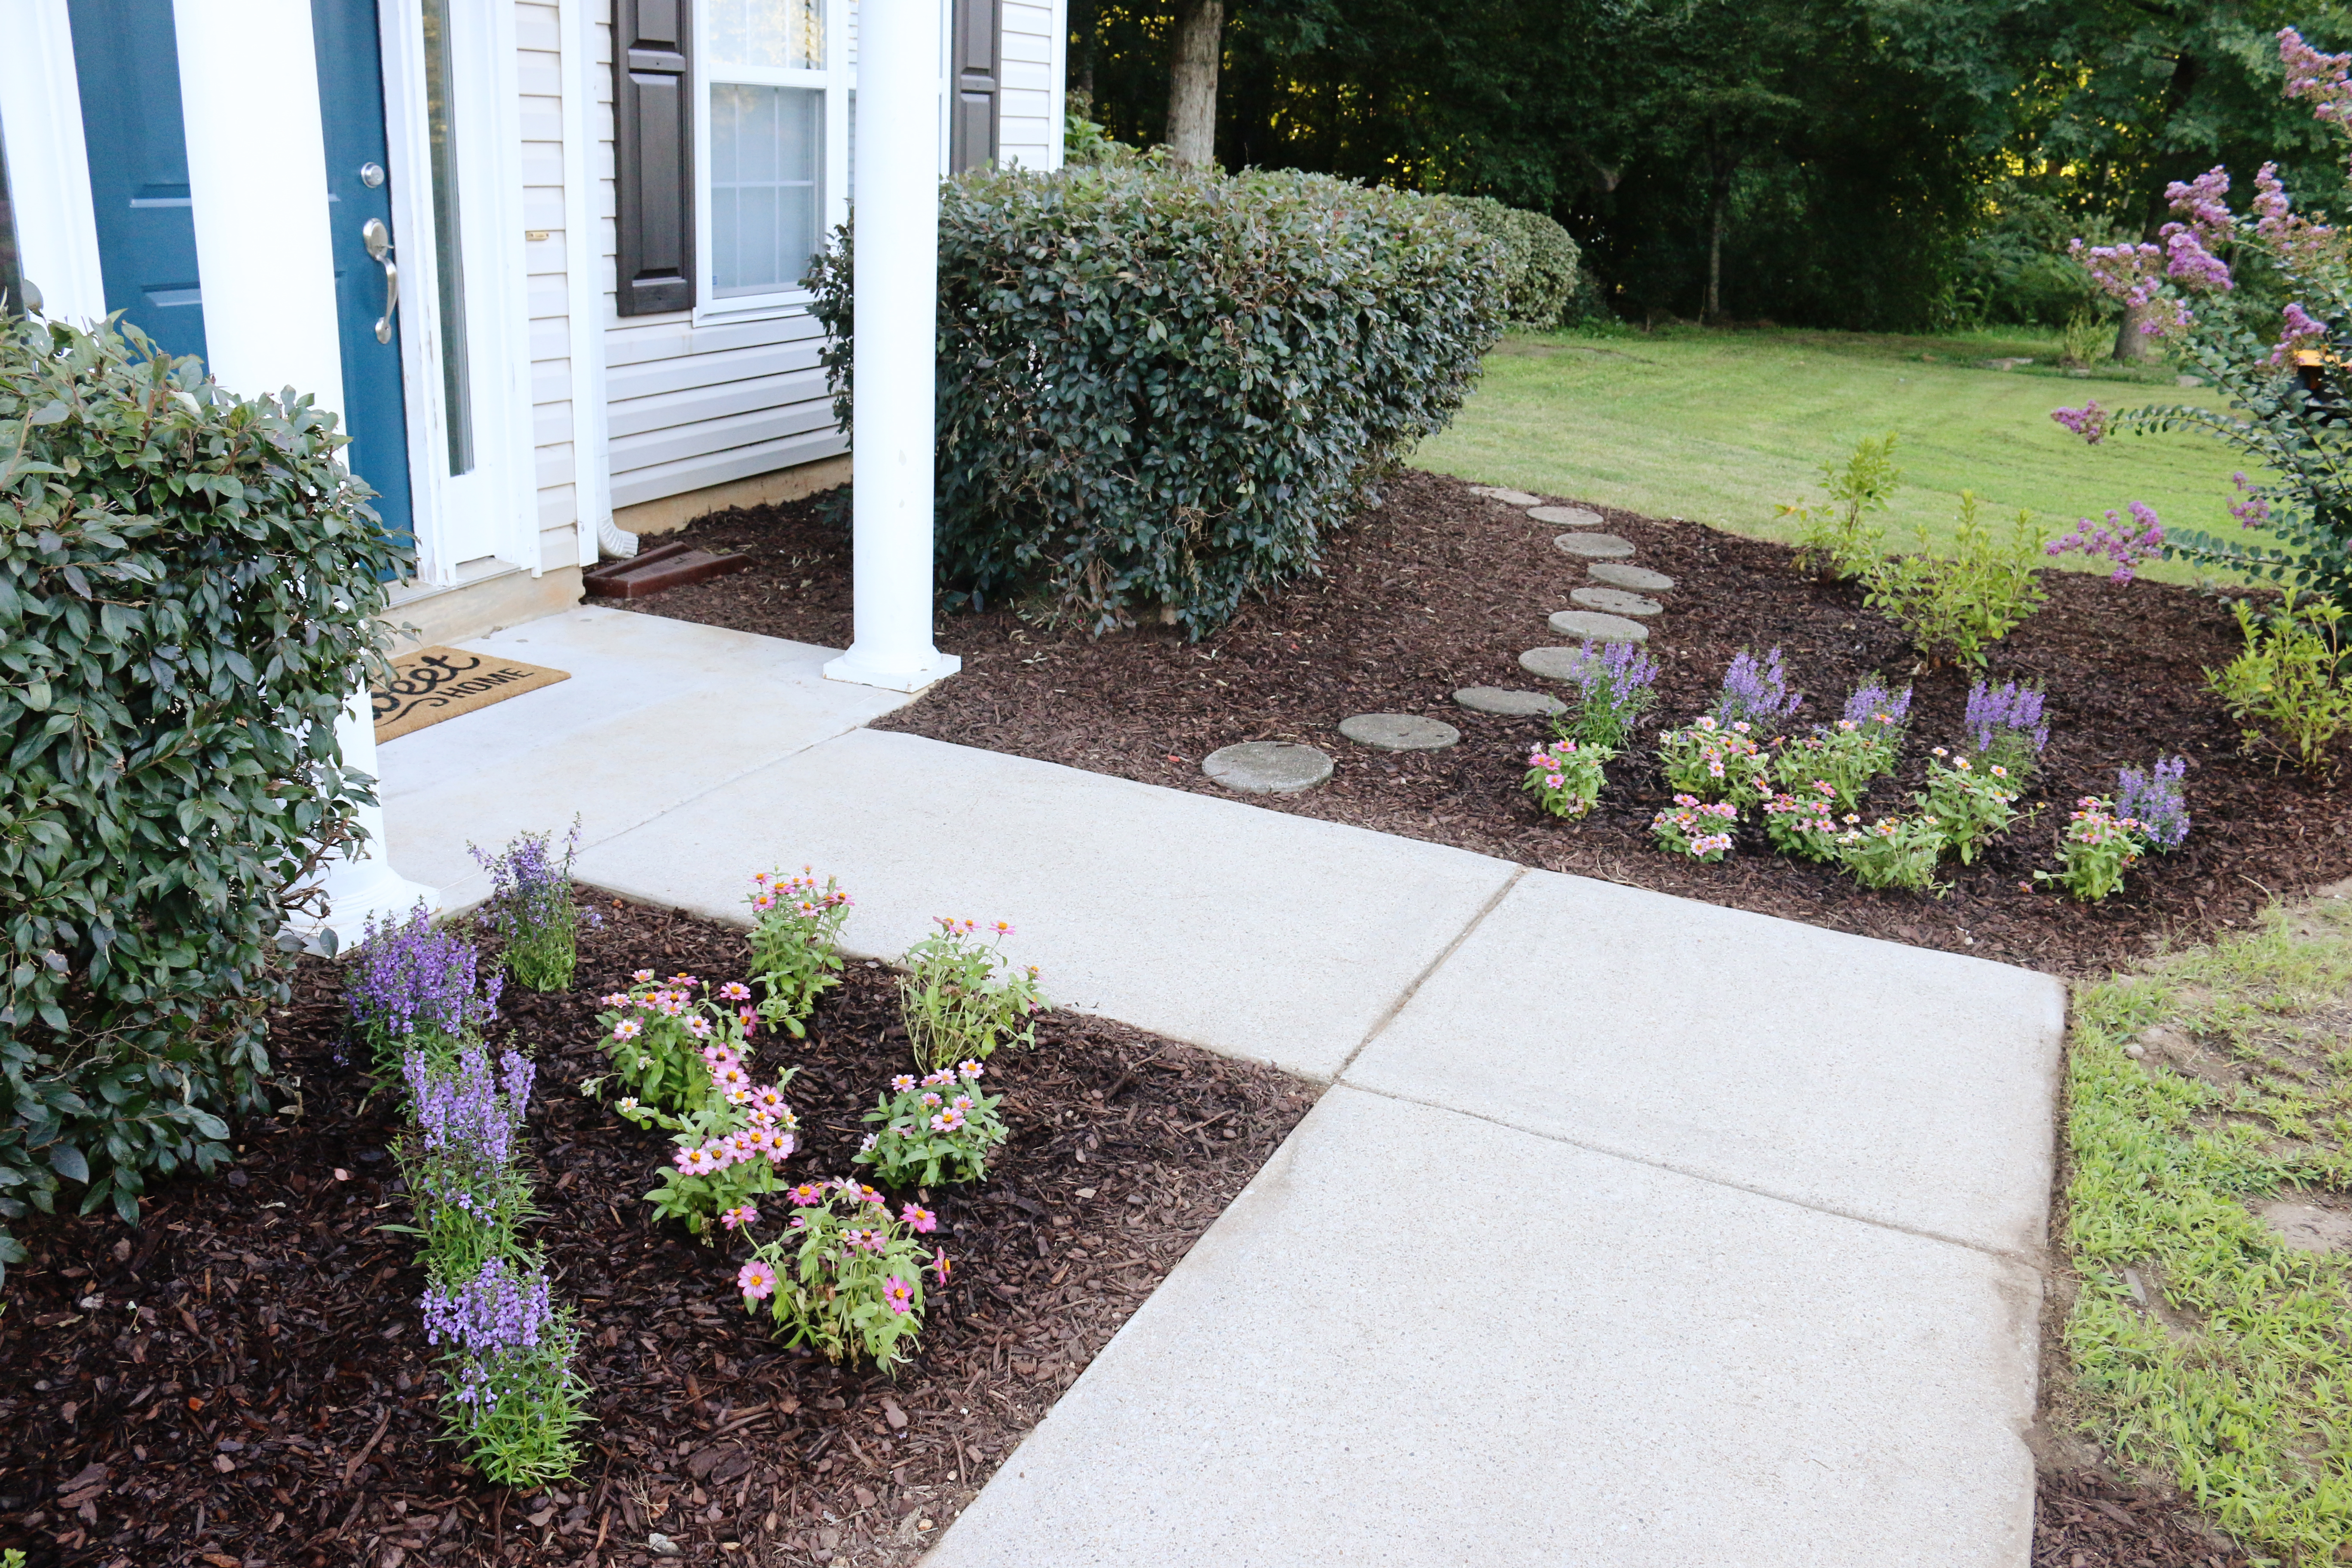 BLACK+DECKER on X: Looking to increase your curb appeal? It's as